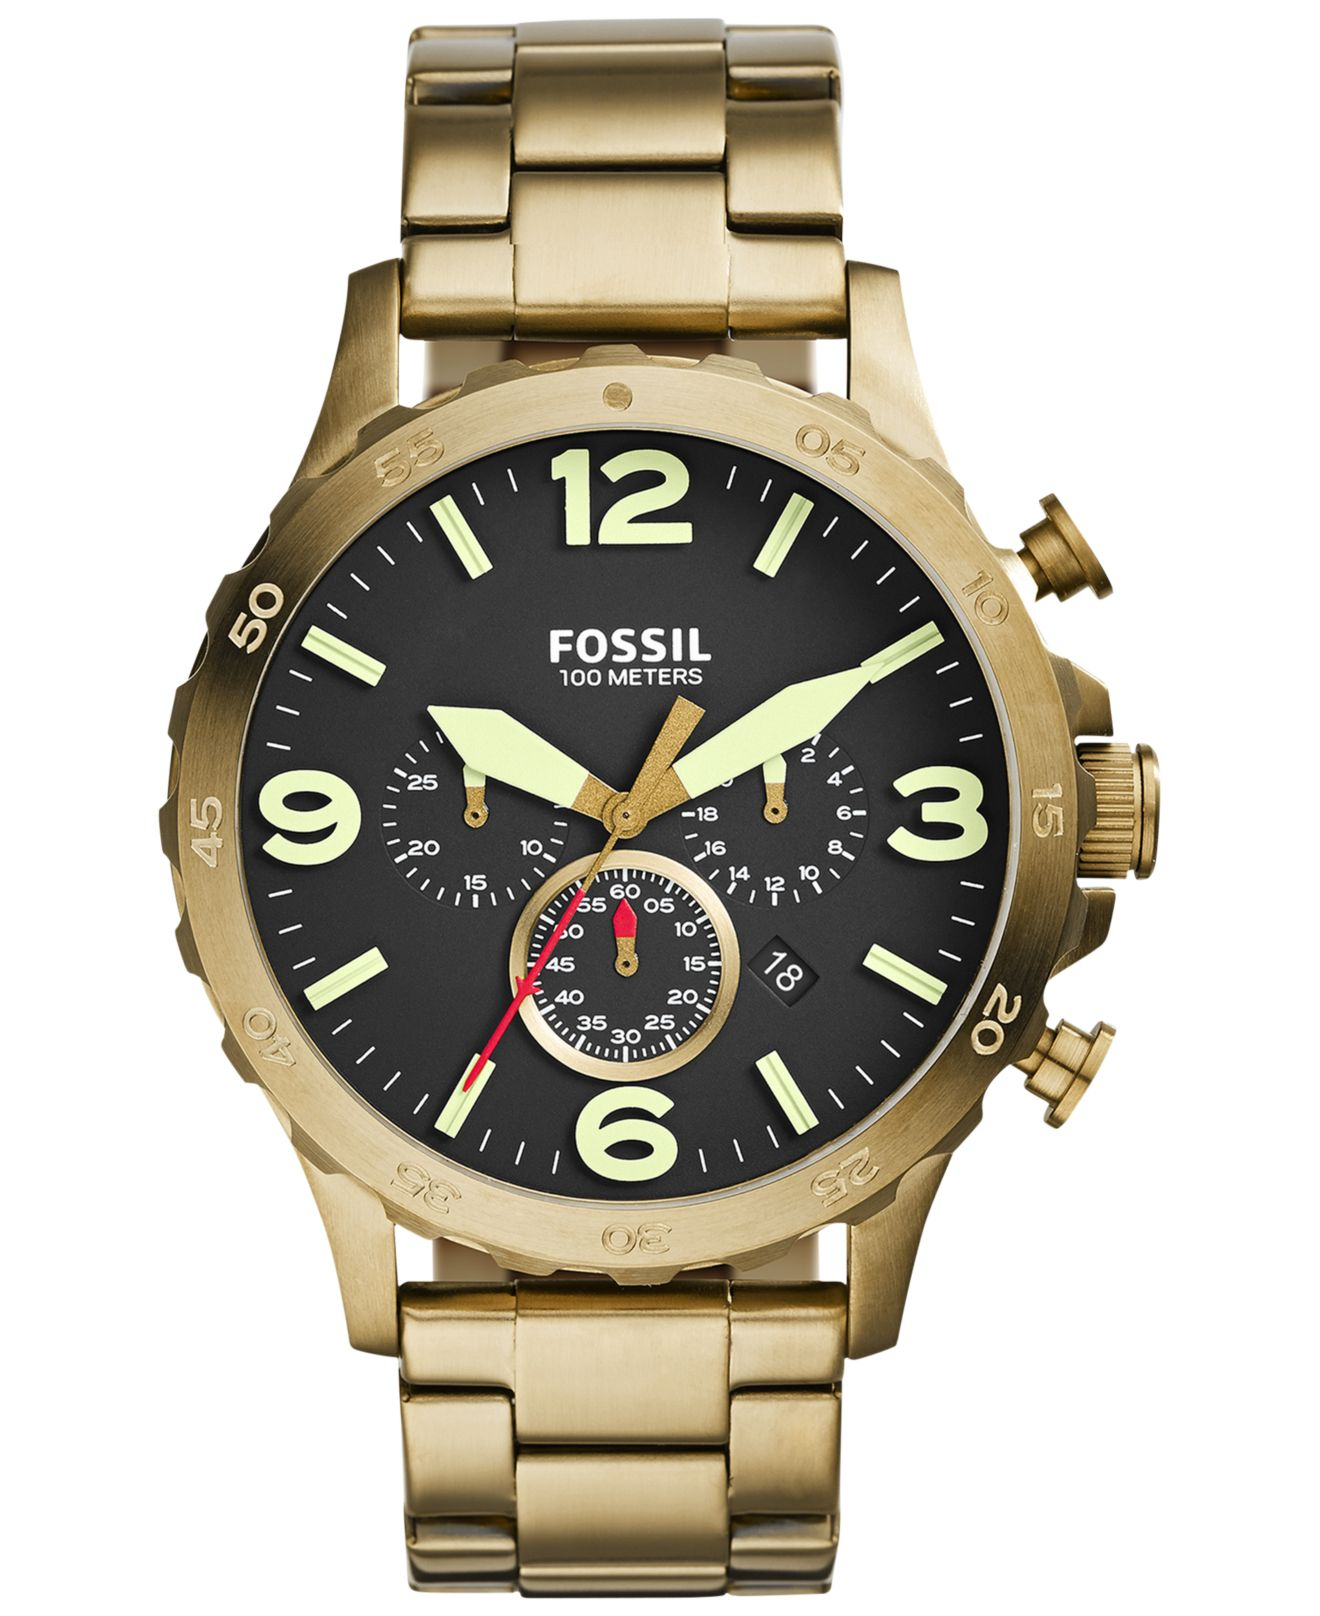 Fossil Men'S Chronograph Nate Gold-Tone Stainless Steel Bracelet Watch